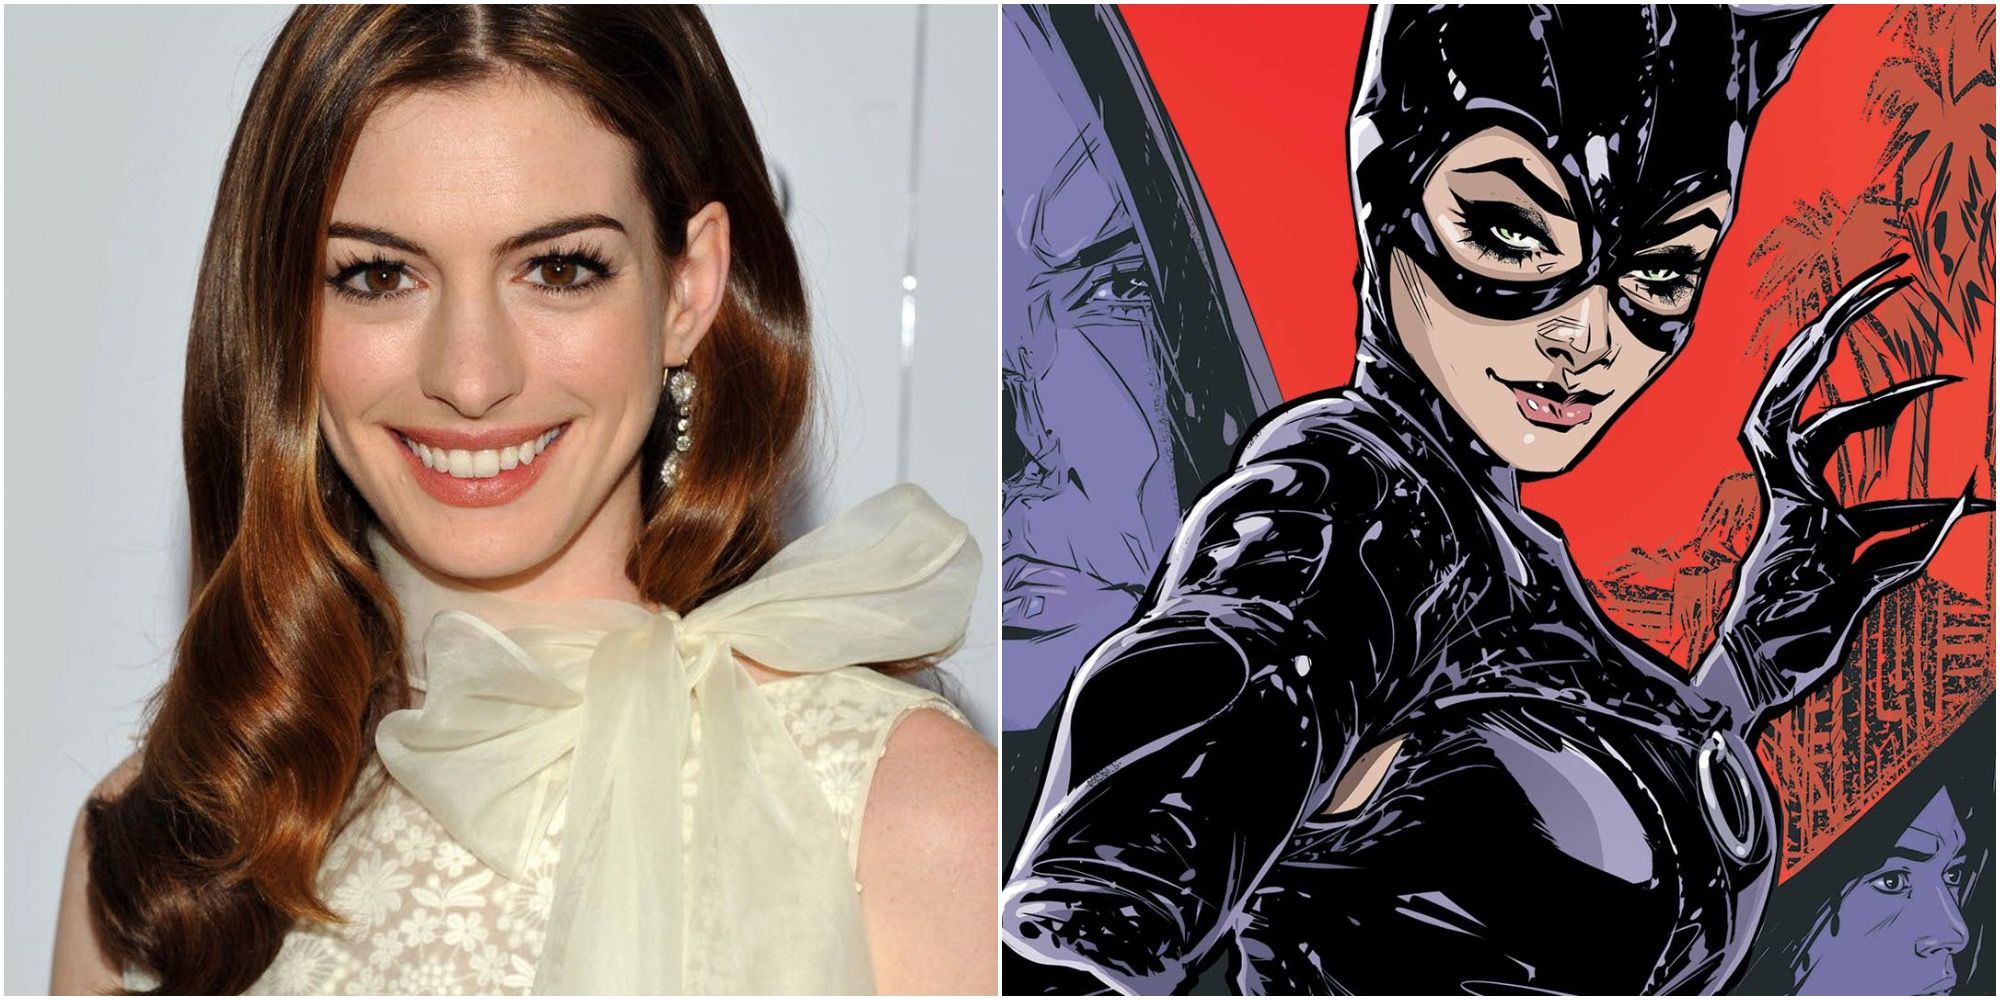 Anne Hathaway and Catwoman in the comics